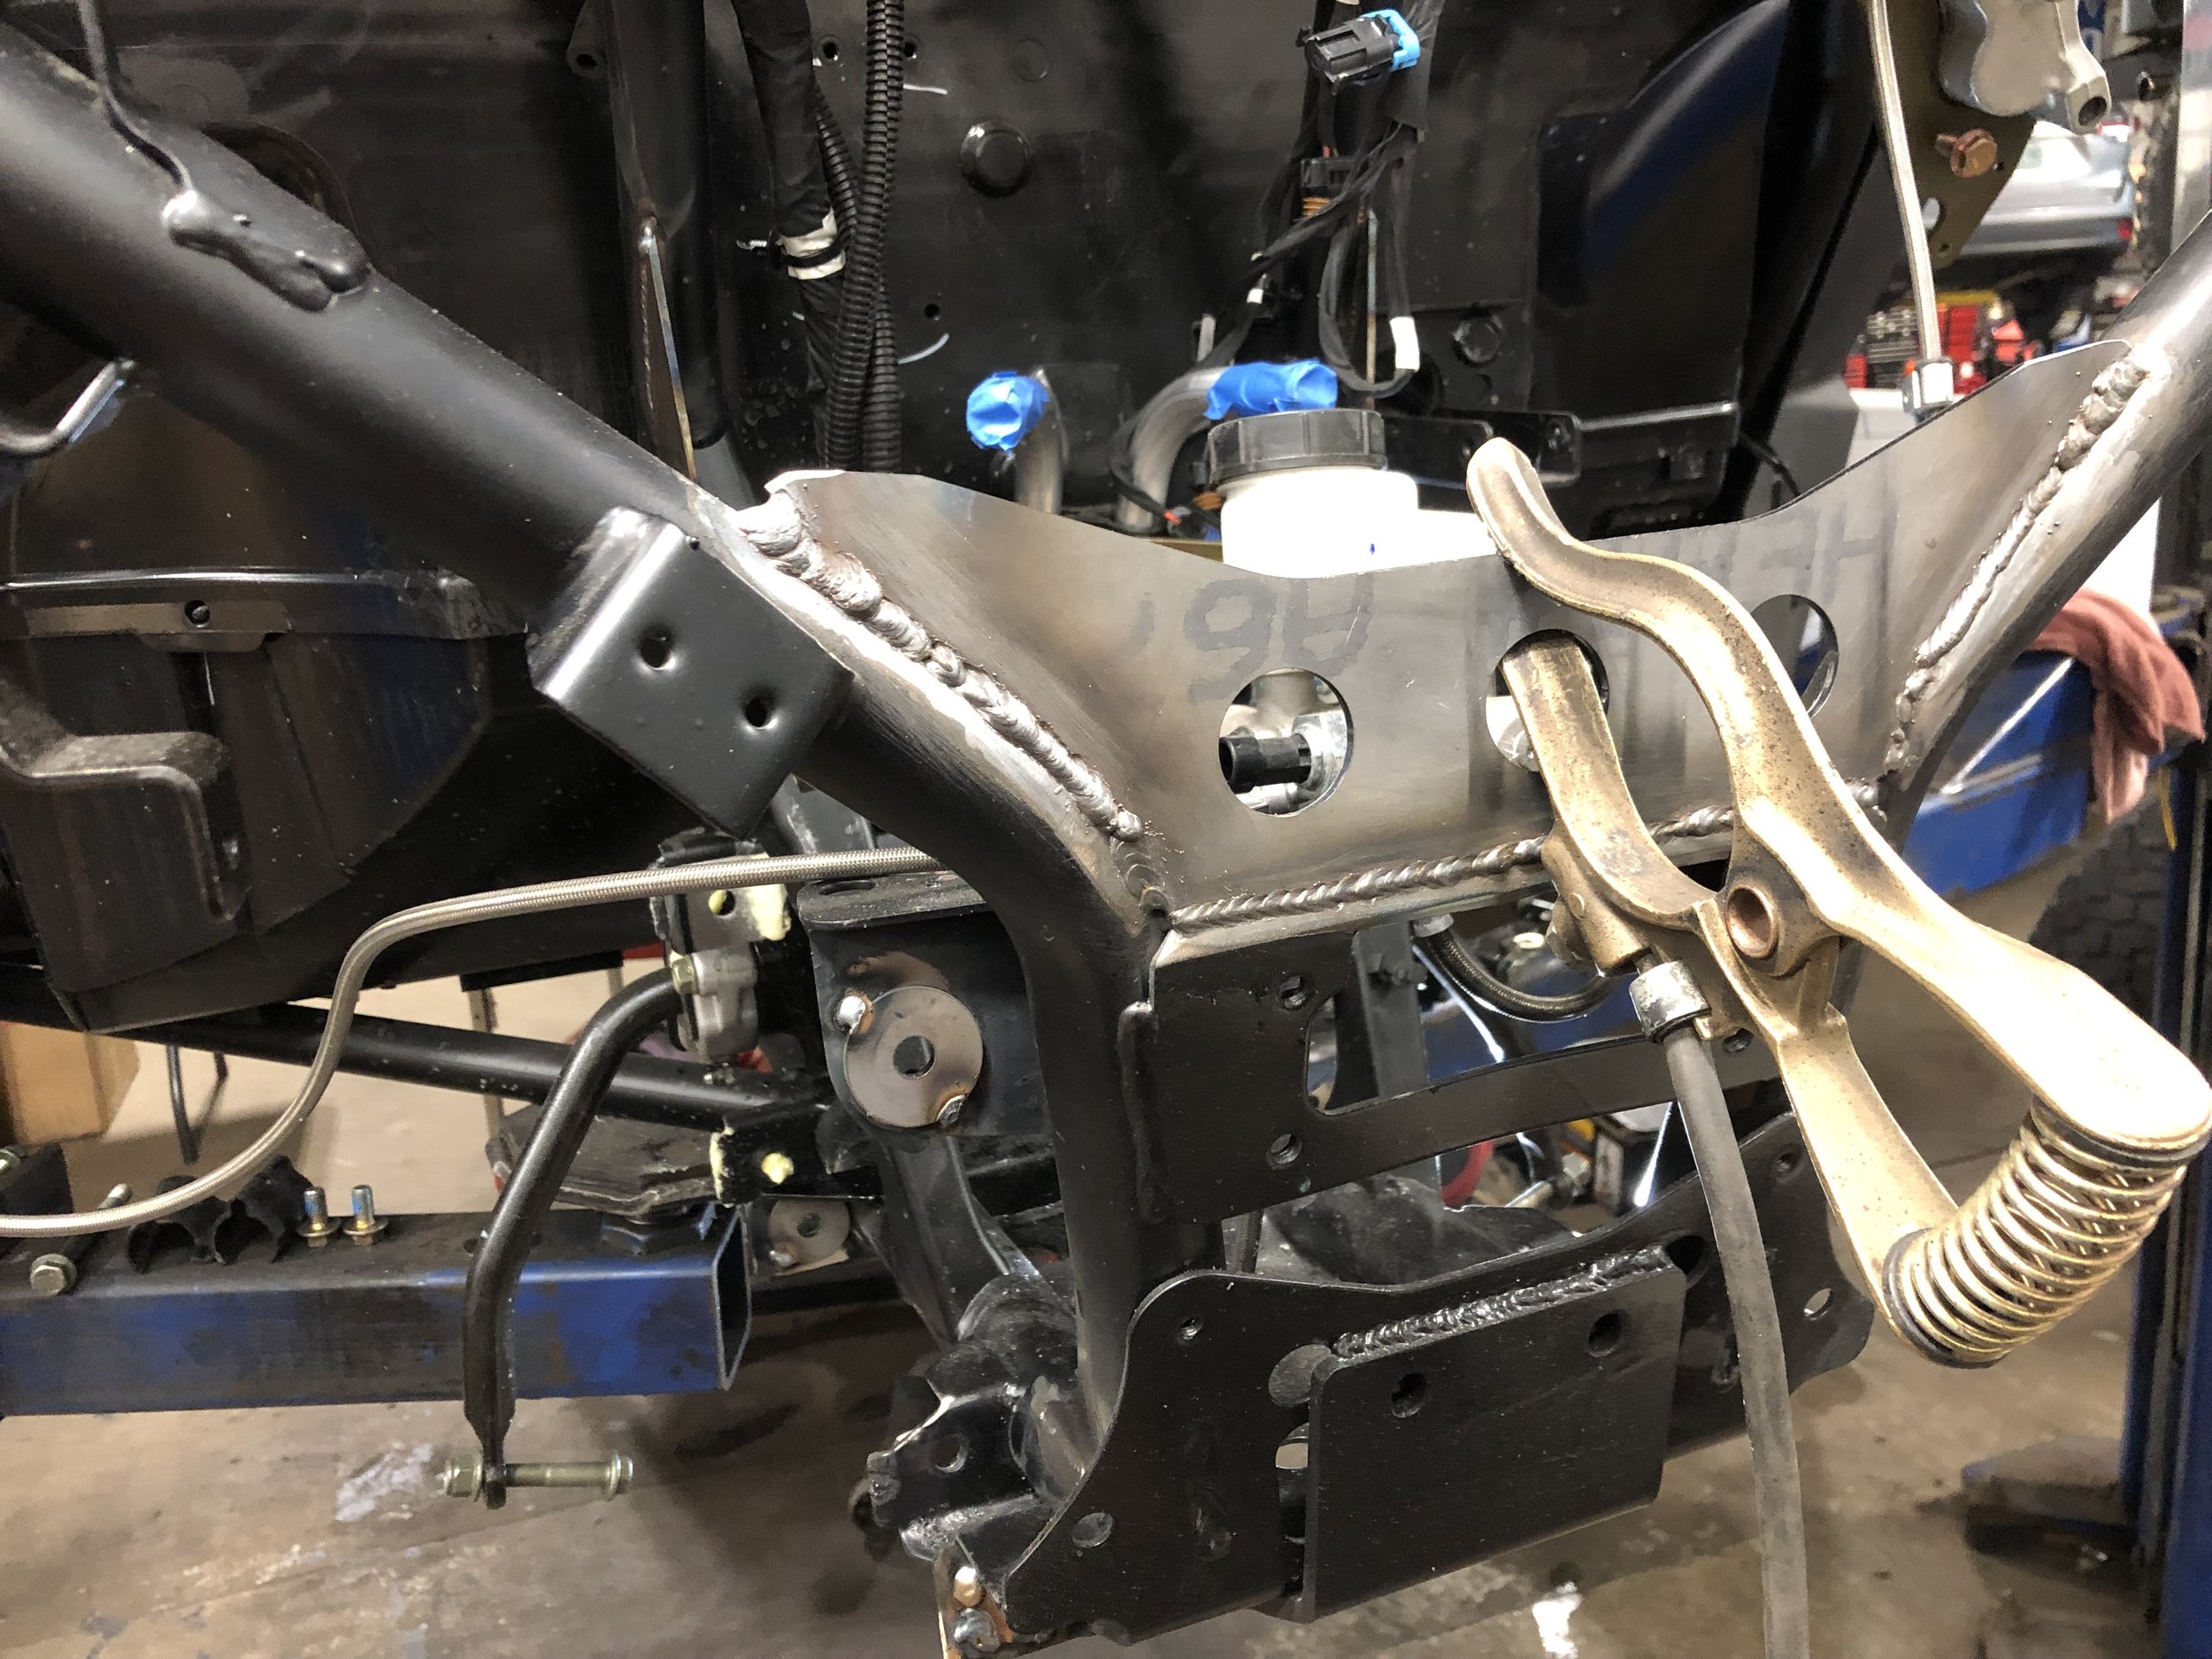  Front upper frame gusset. This is a known weak spot for Polaris RZR frames.  